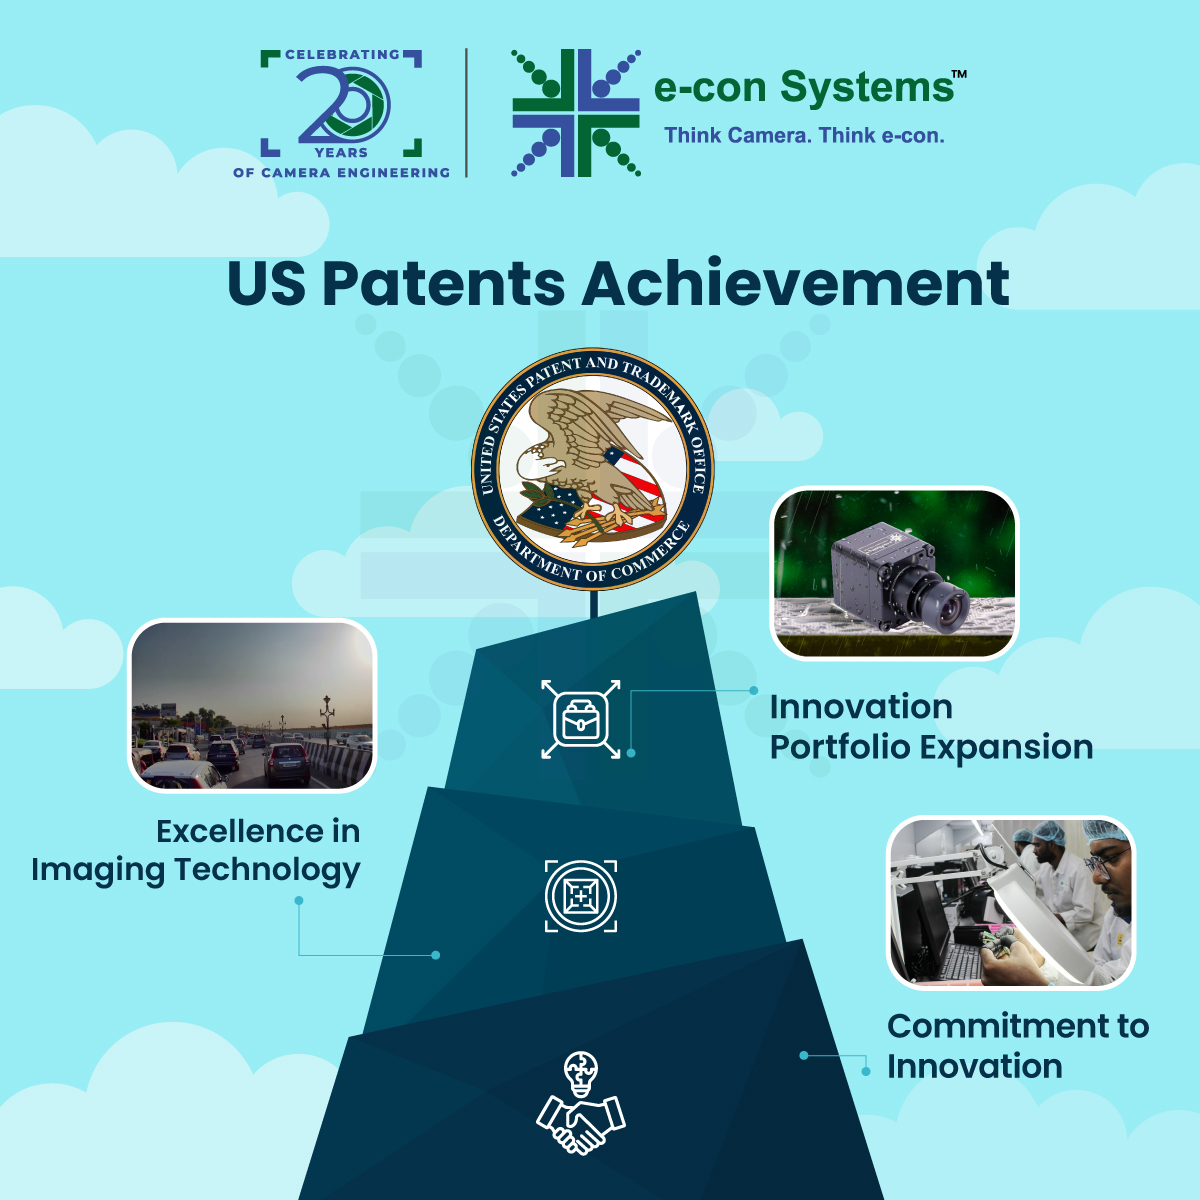 e-con Systems Adds Two New US Patents to the Company’s Imaging Innovation Portfolio (Techatty)